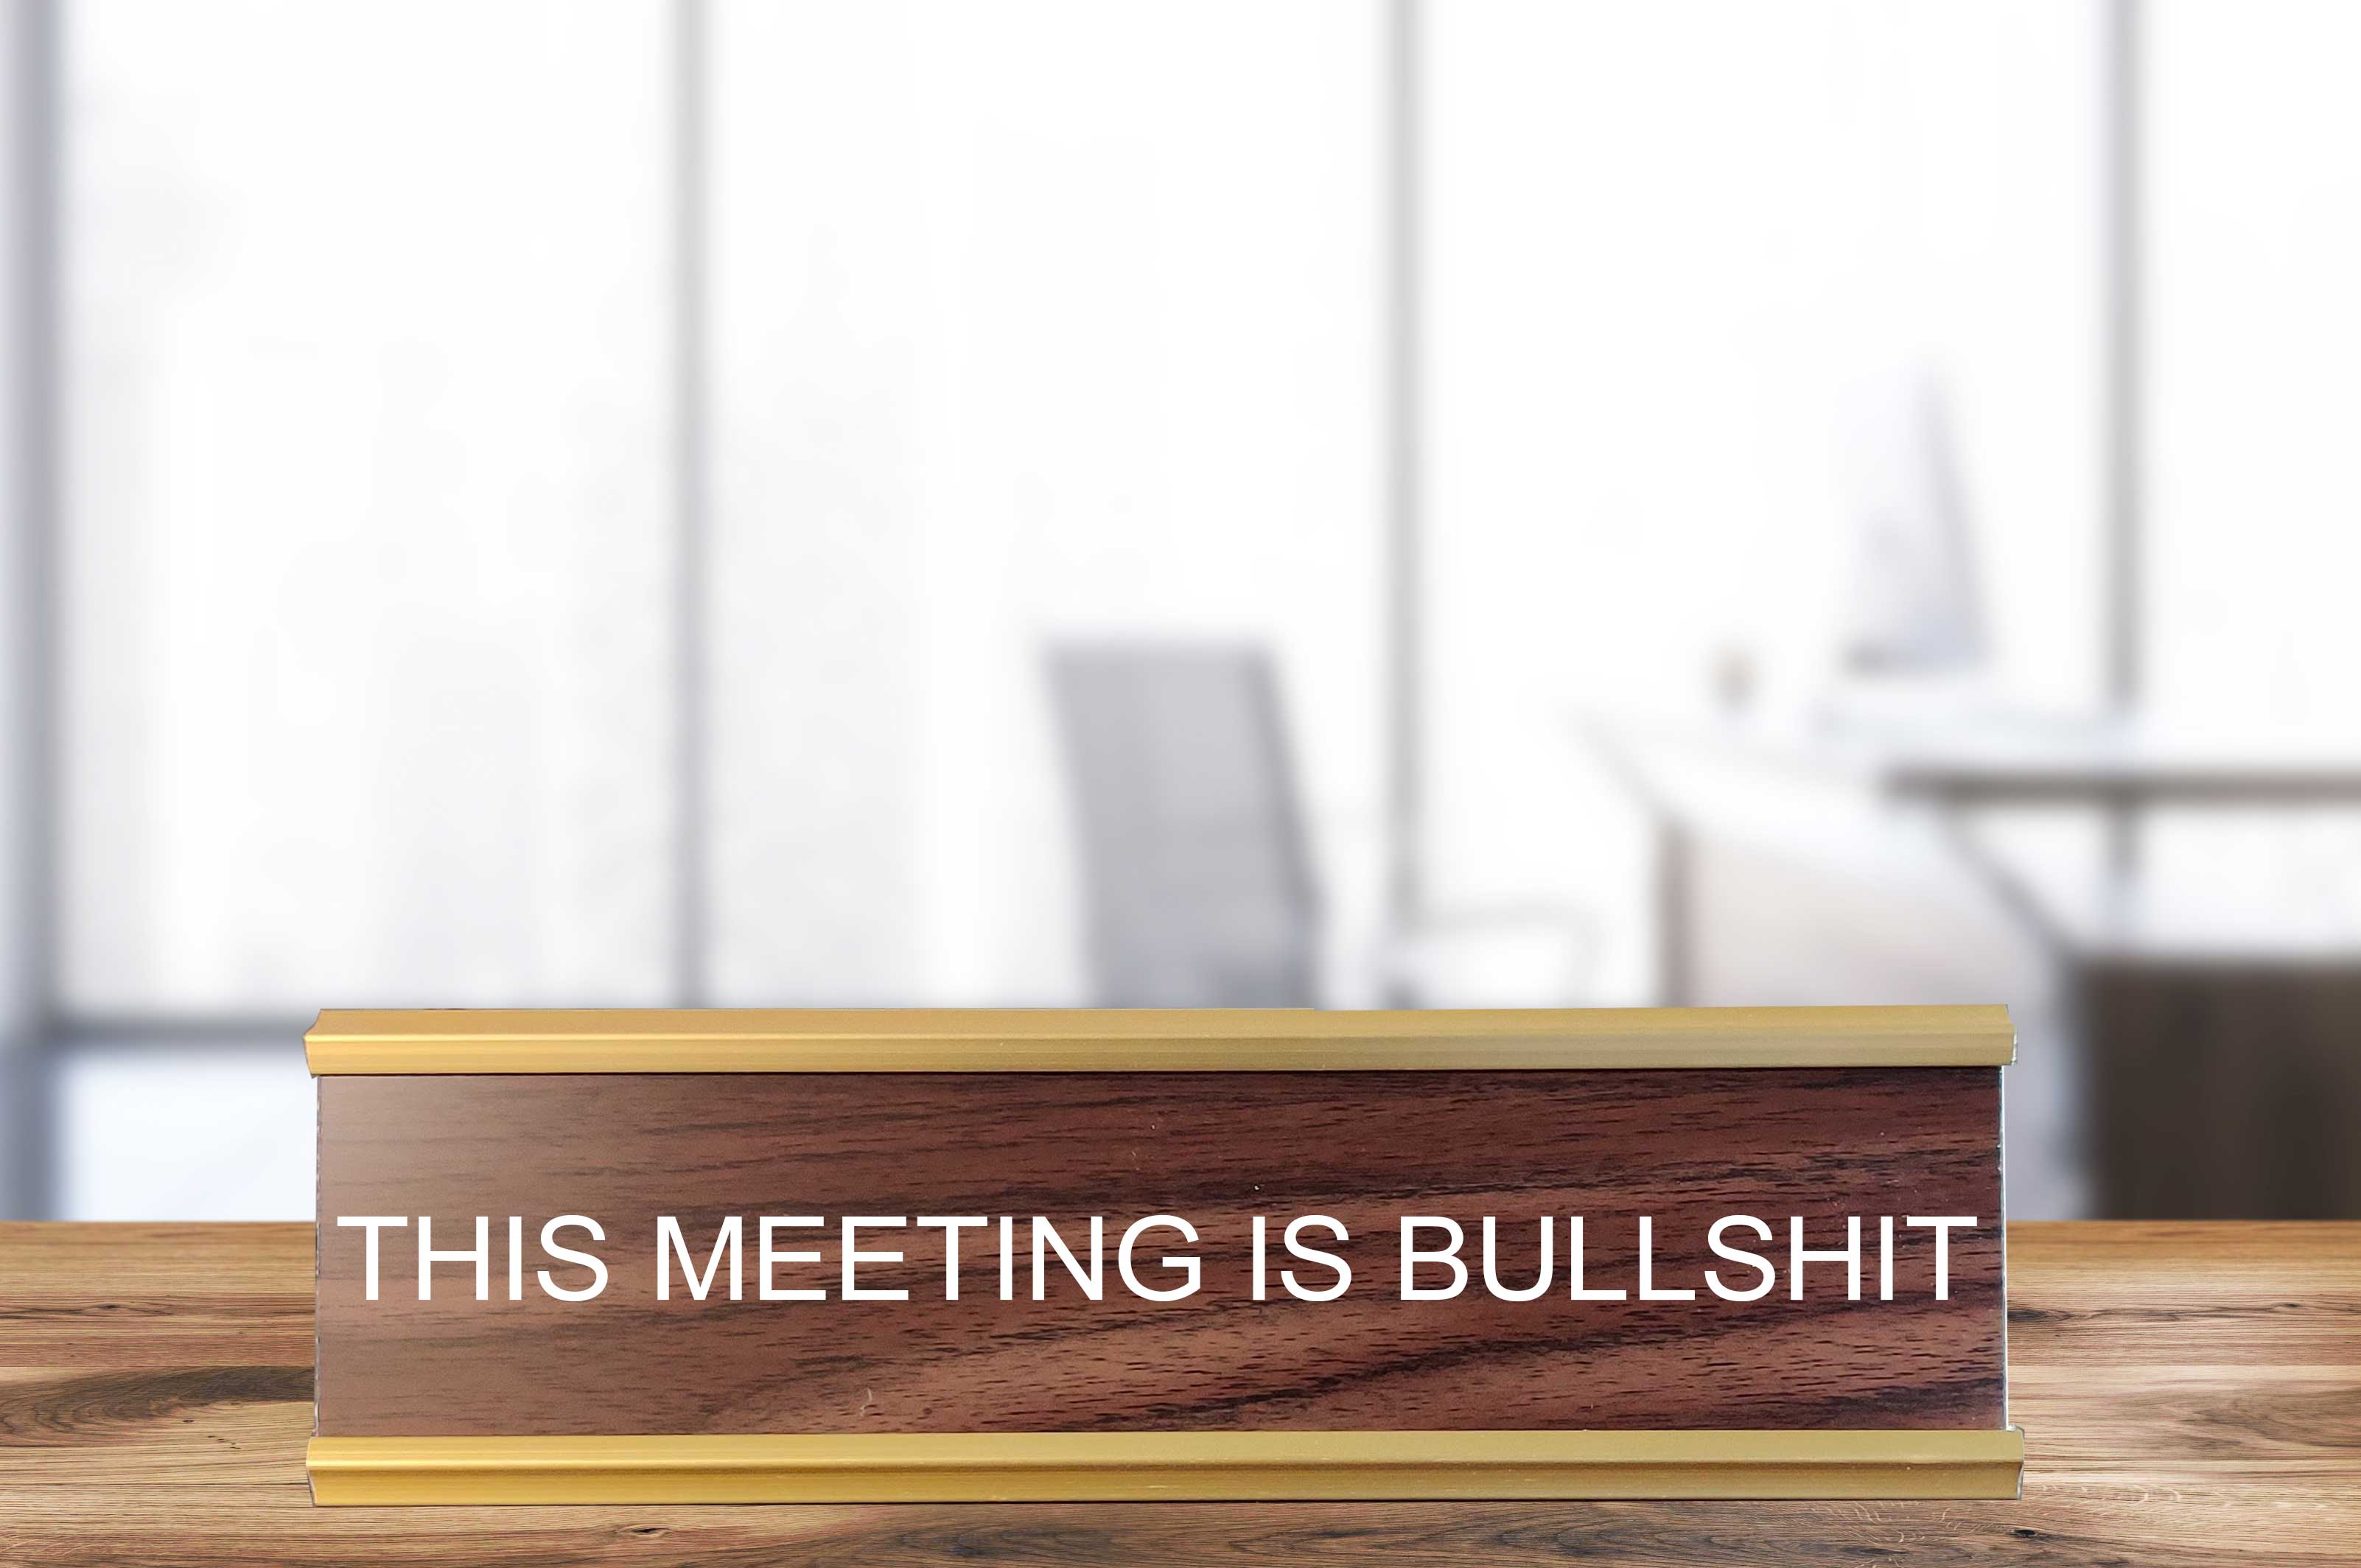 PMF NSFW NAMEPLATES This Meeting is Bull Sh*t - NSFW Nameplate